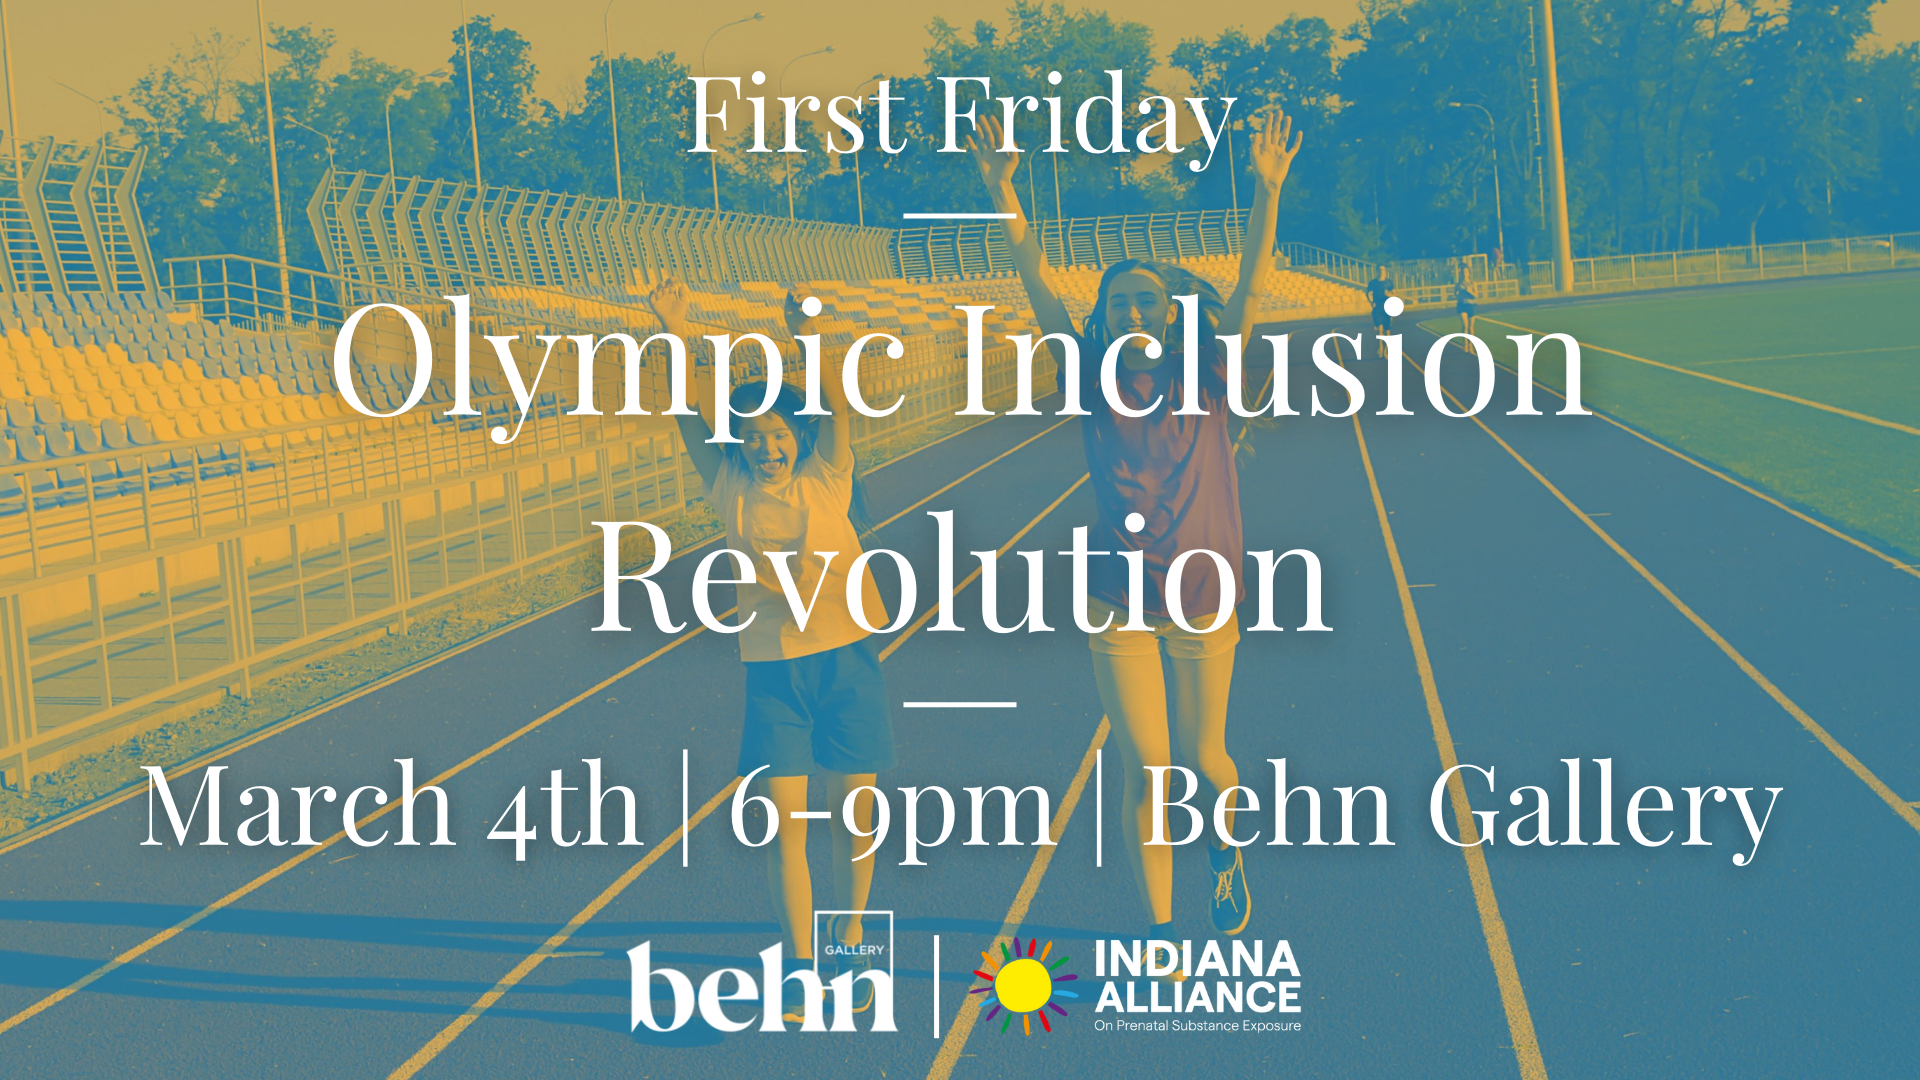 Olympic Inclusion Revolution: A First Friday Event